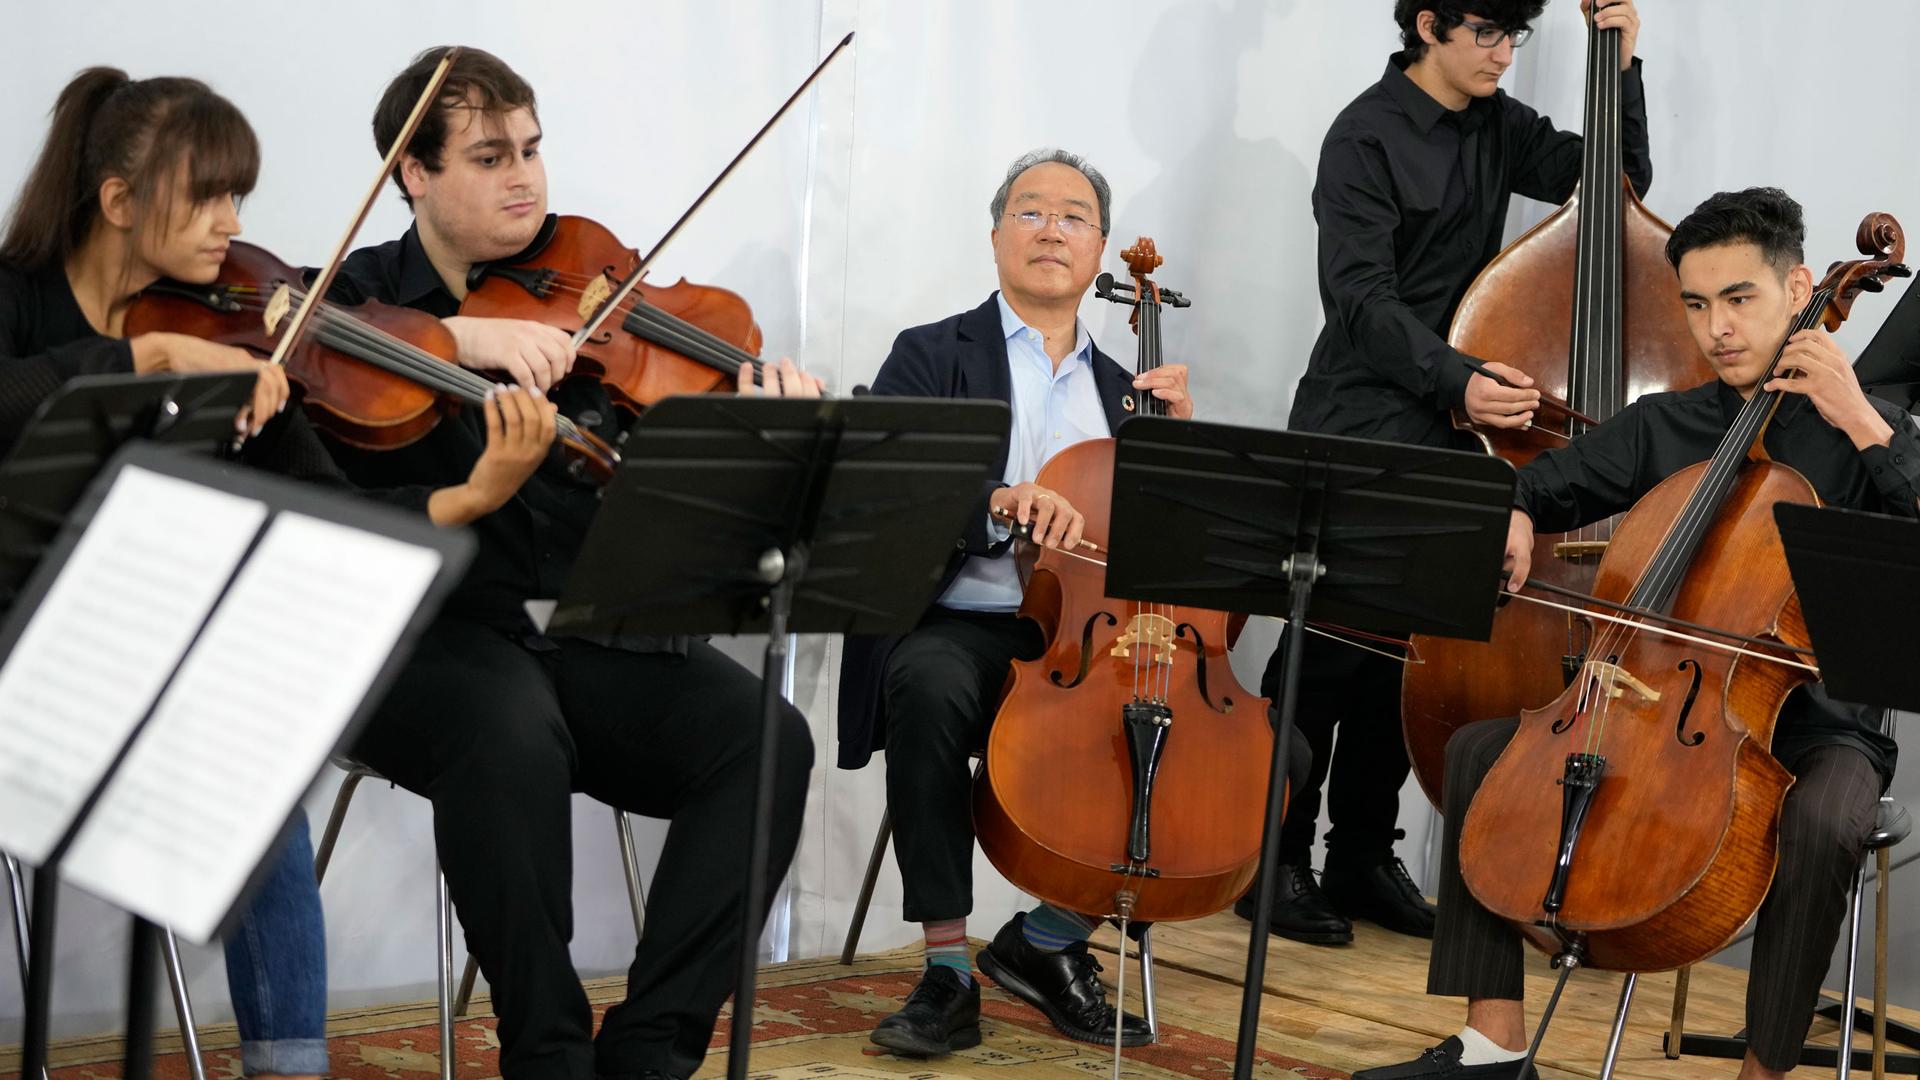 World renowned US cellist Yo-Yo Ma, center, plays with viola players Marzia Anwari, left, from Afghanistan and Luis Fernandes, bassist Eduardo Santos and cellist Mohammad Sami, right, from Afghanistan, at the Music School of the National Conservatory in L